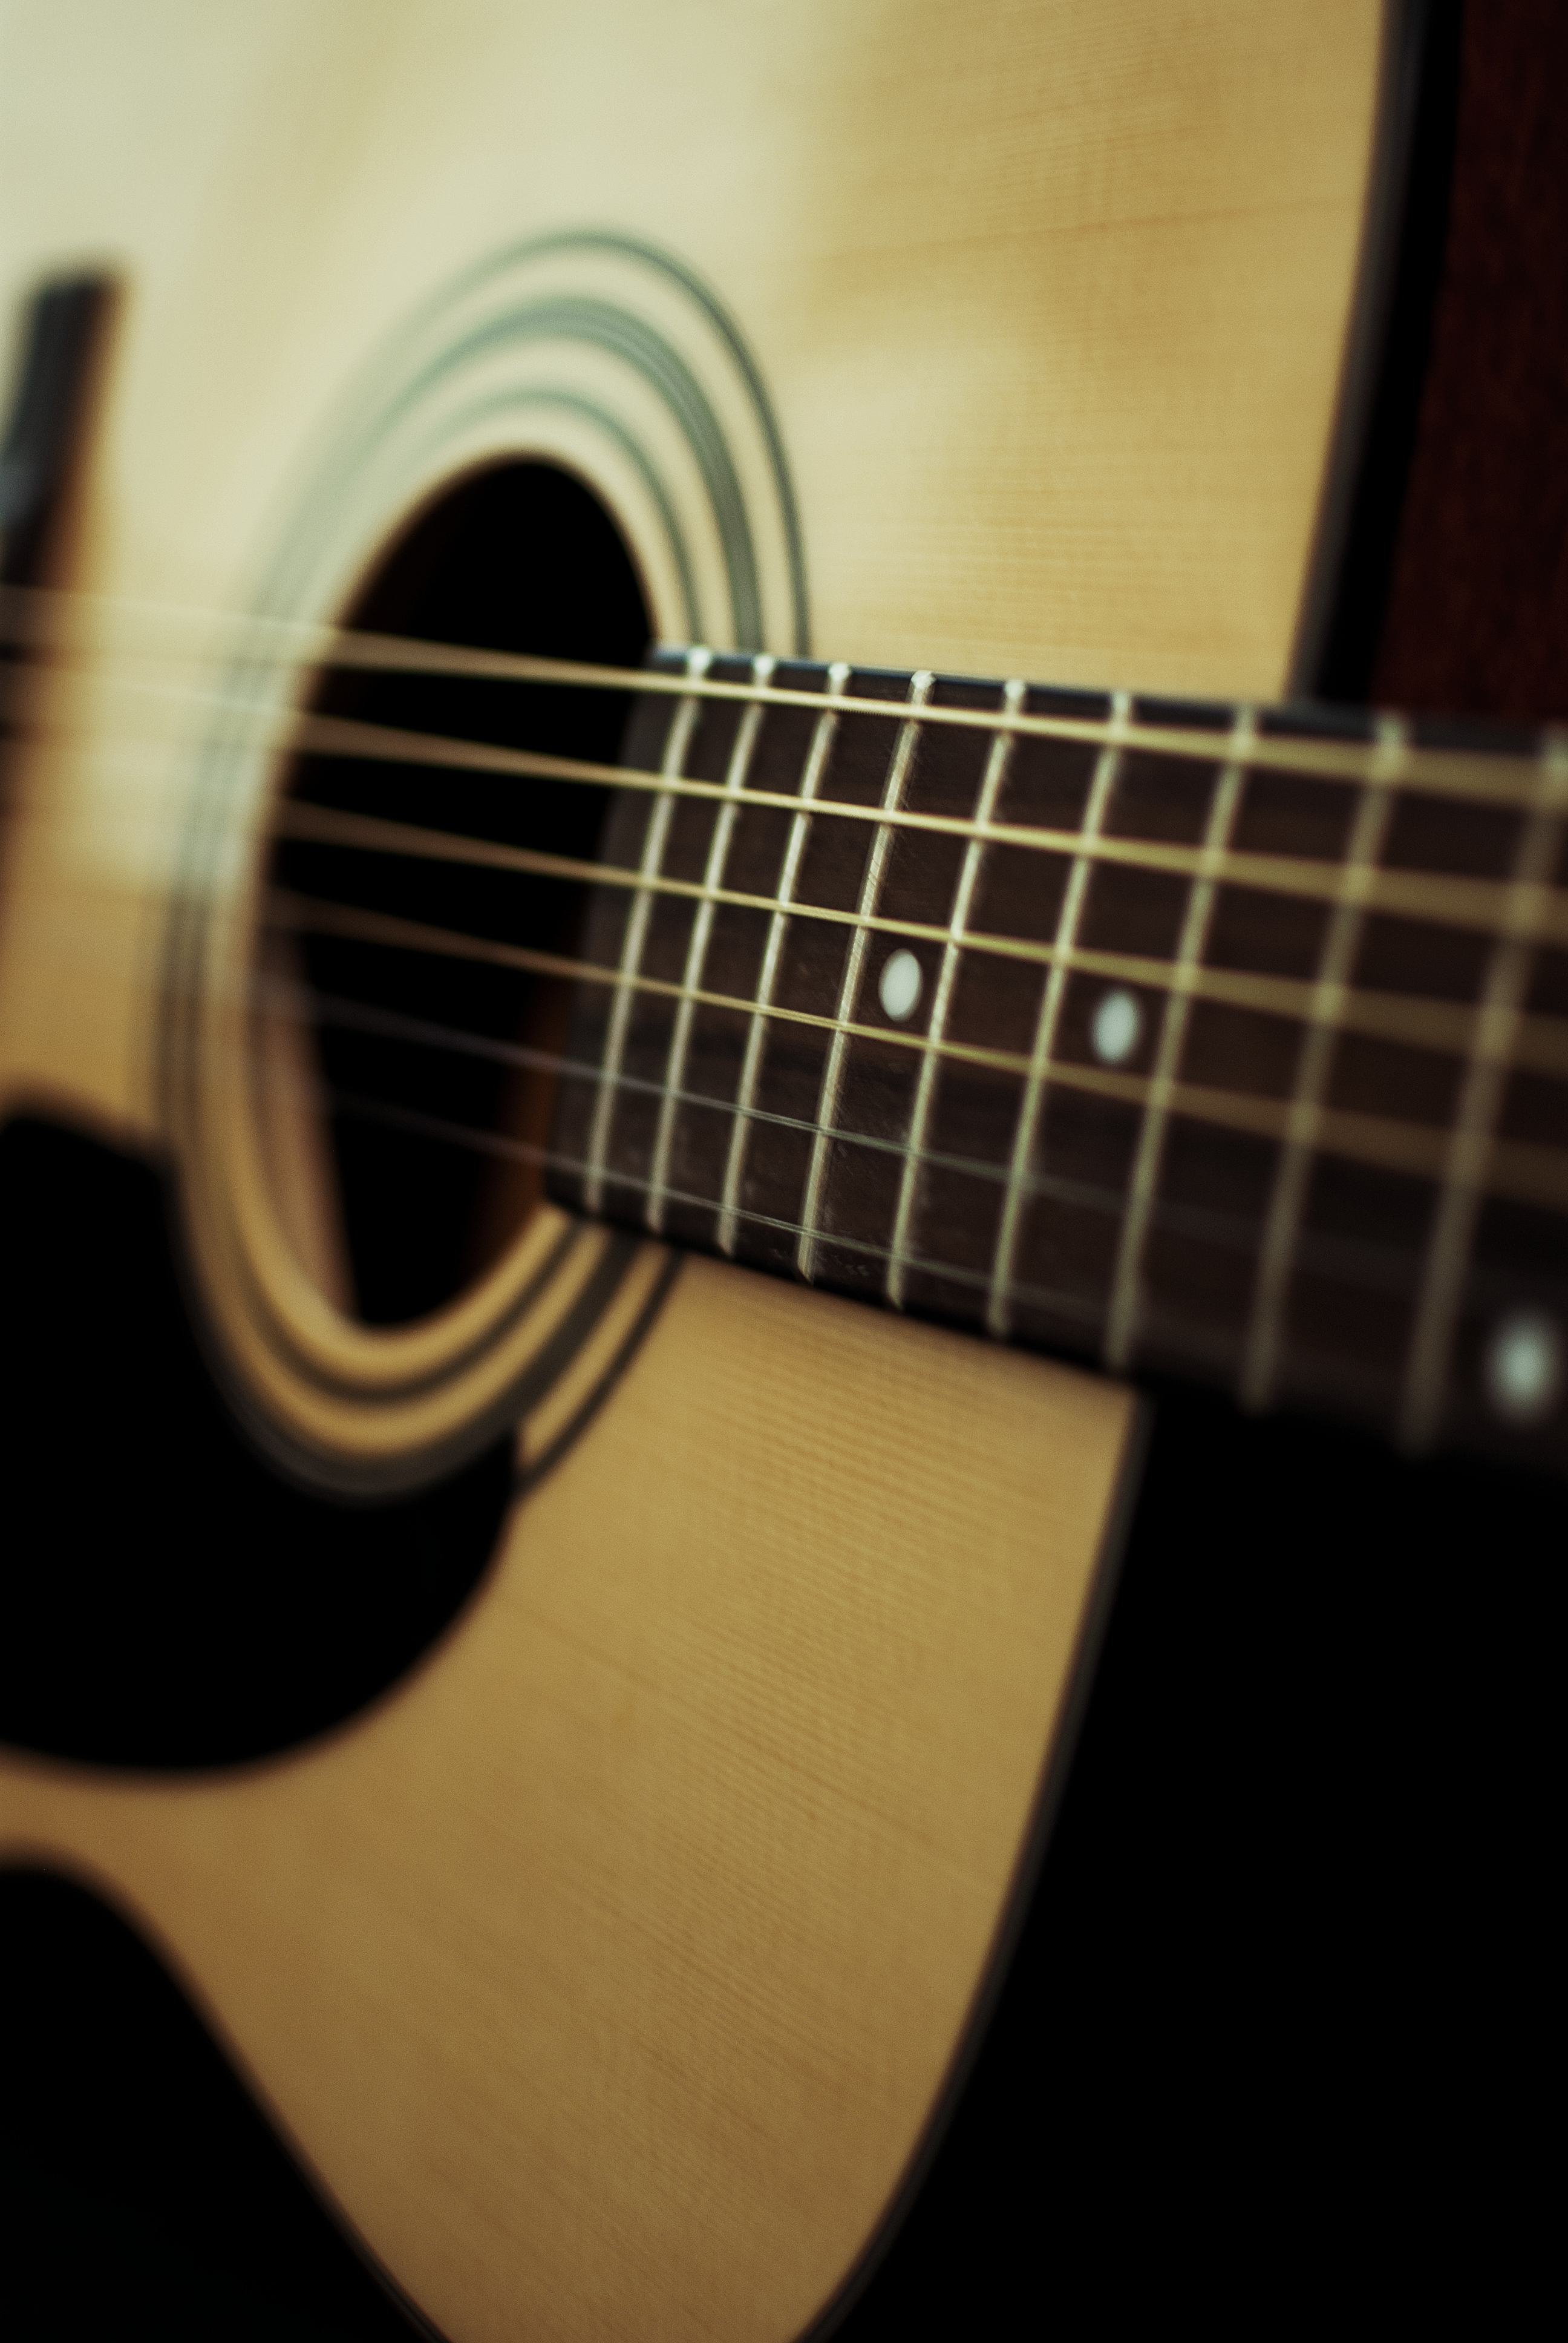 My Guitar and Piano – Close up | My Camera Journal